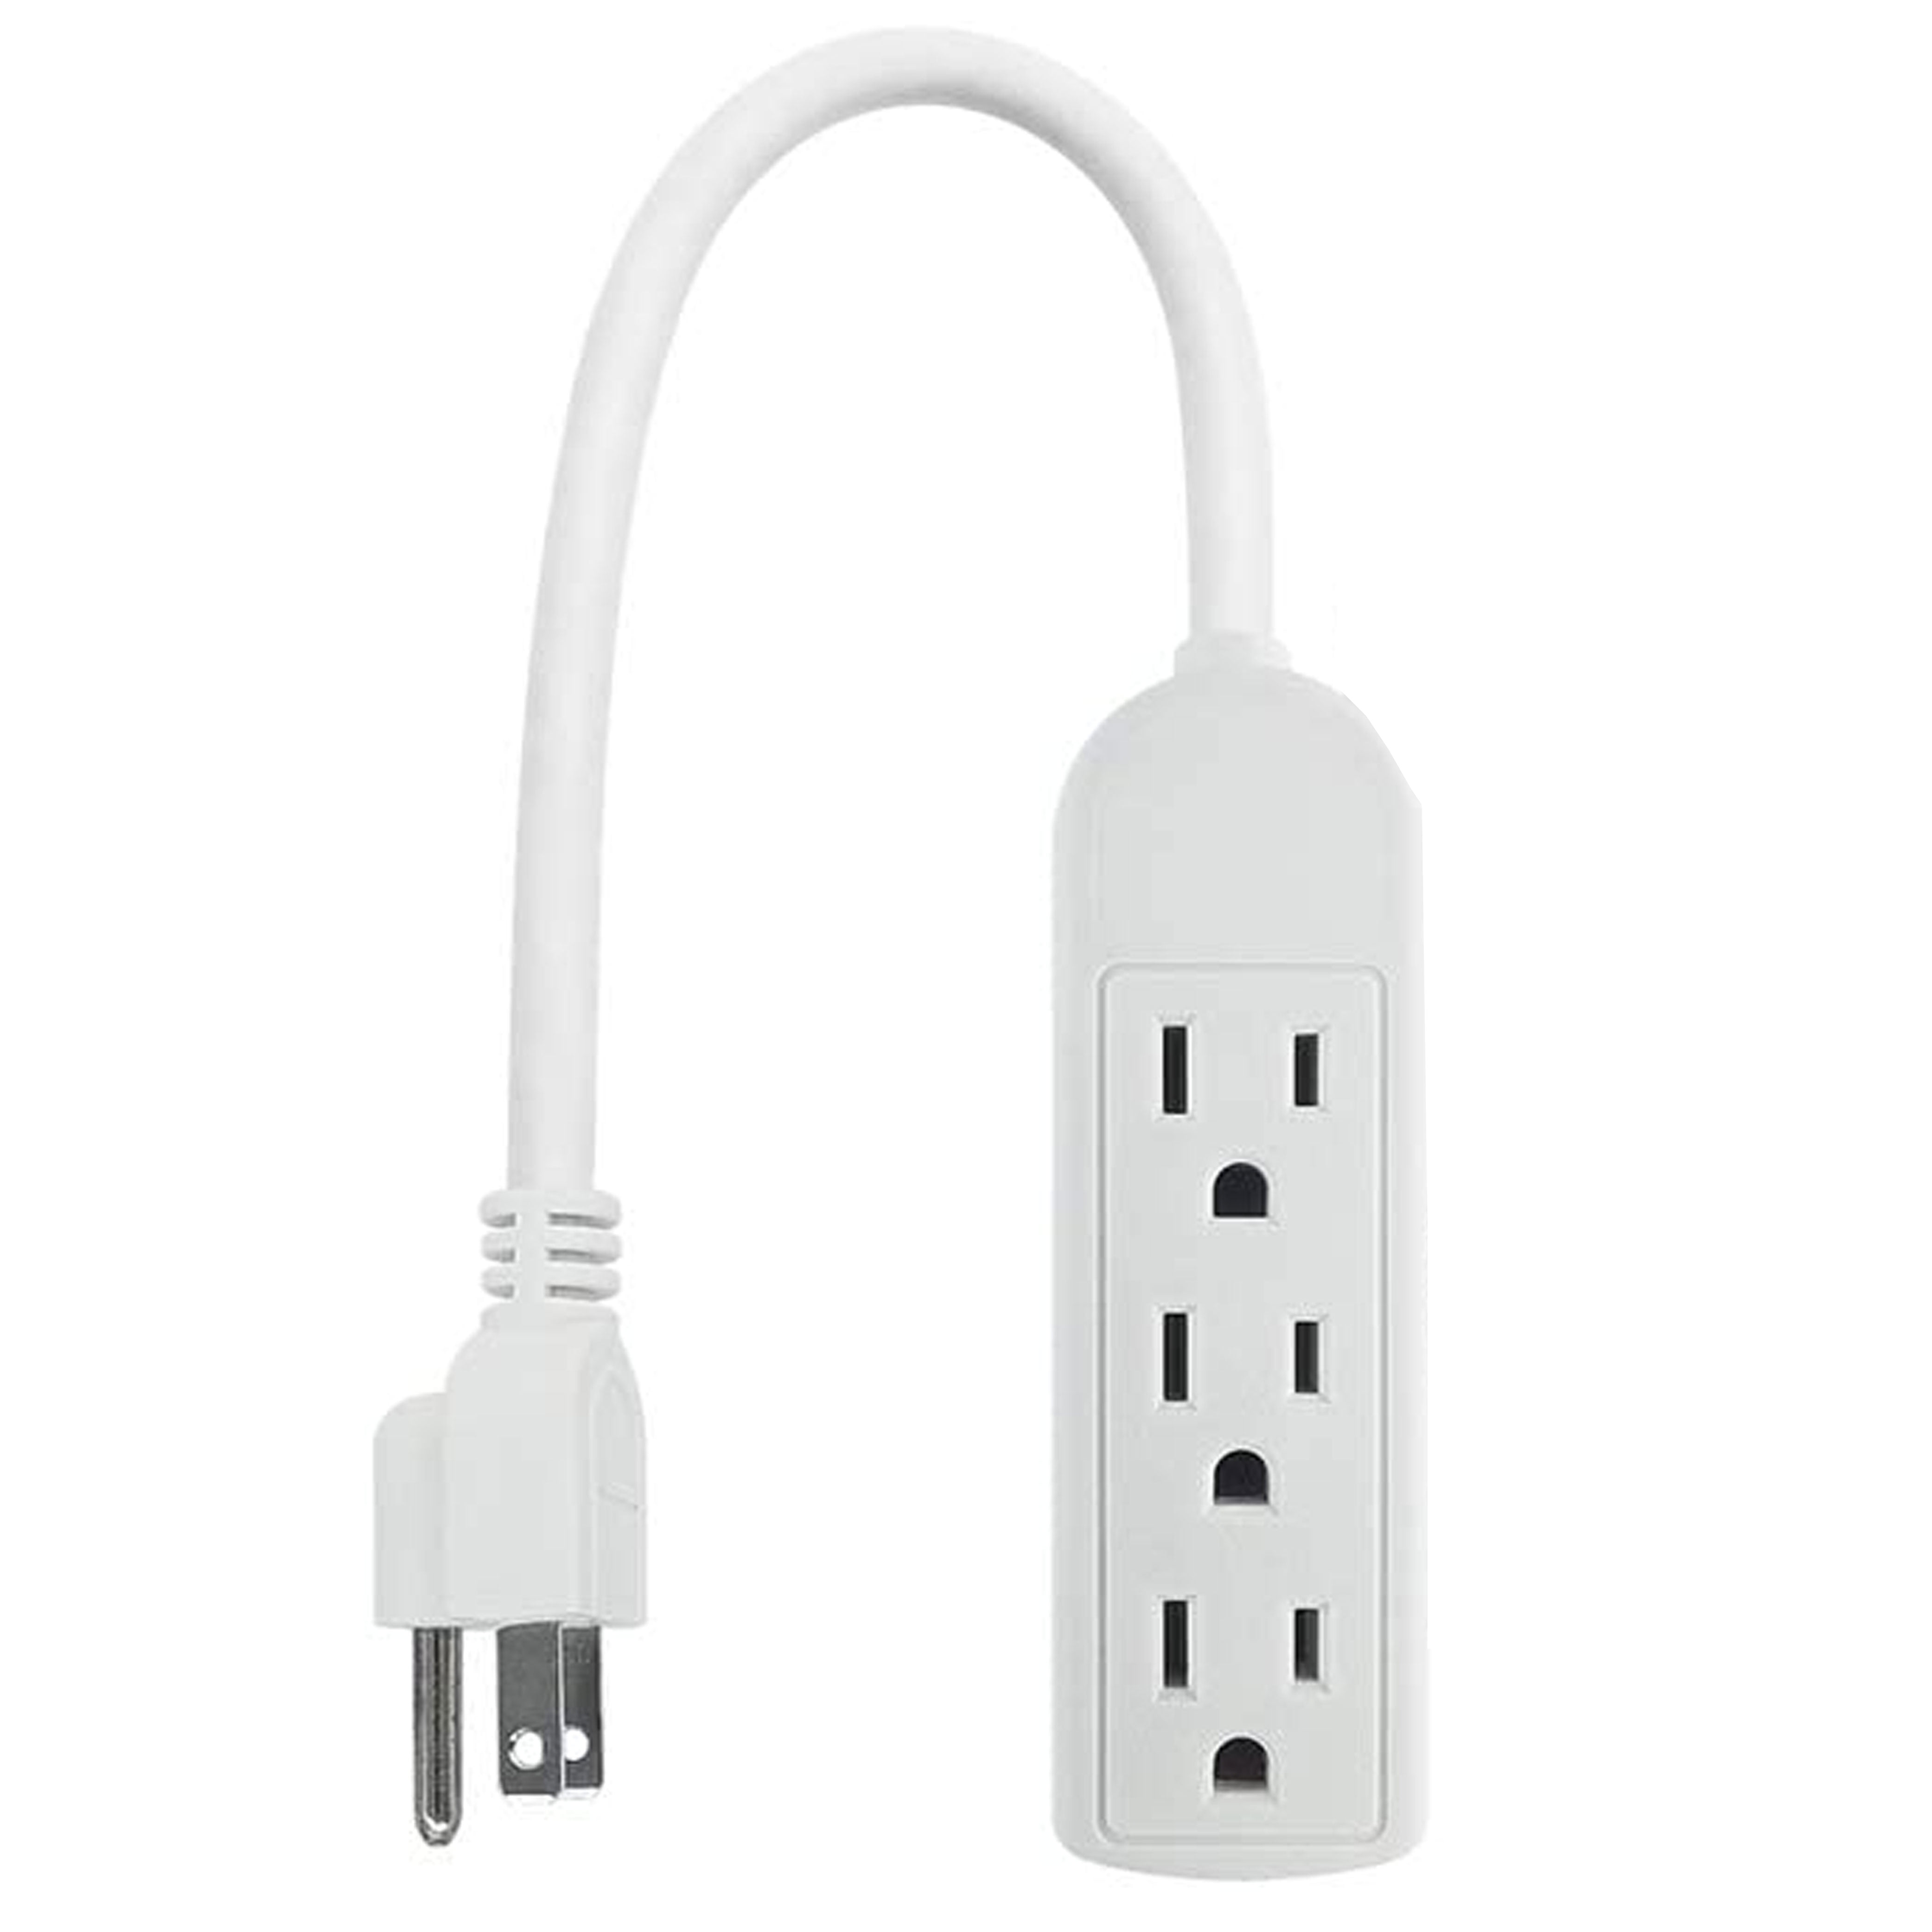 Power Strip Bar Extension 3 Outlet Electrical Wall Plug Socket Grounded 1ft Cord 